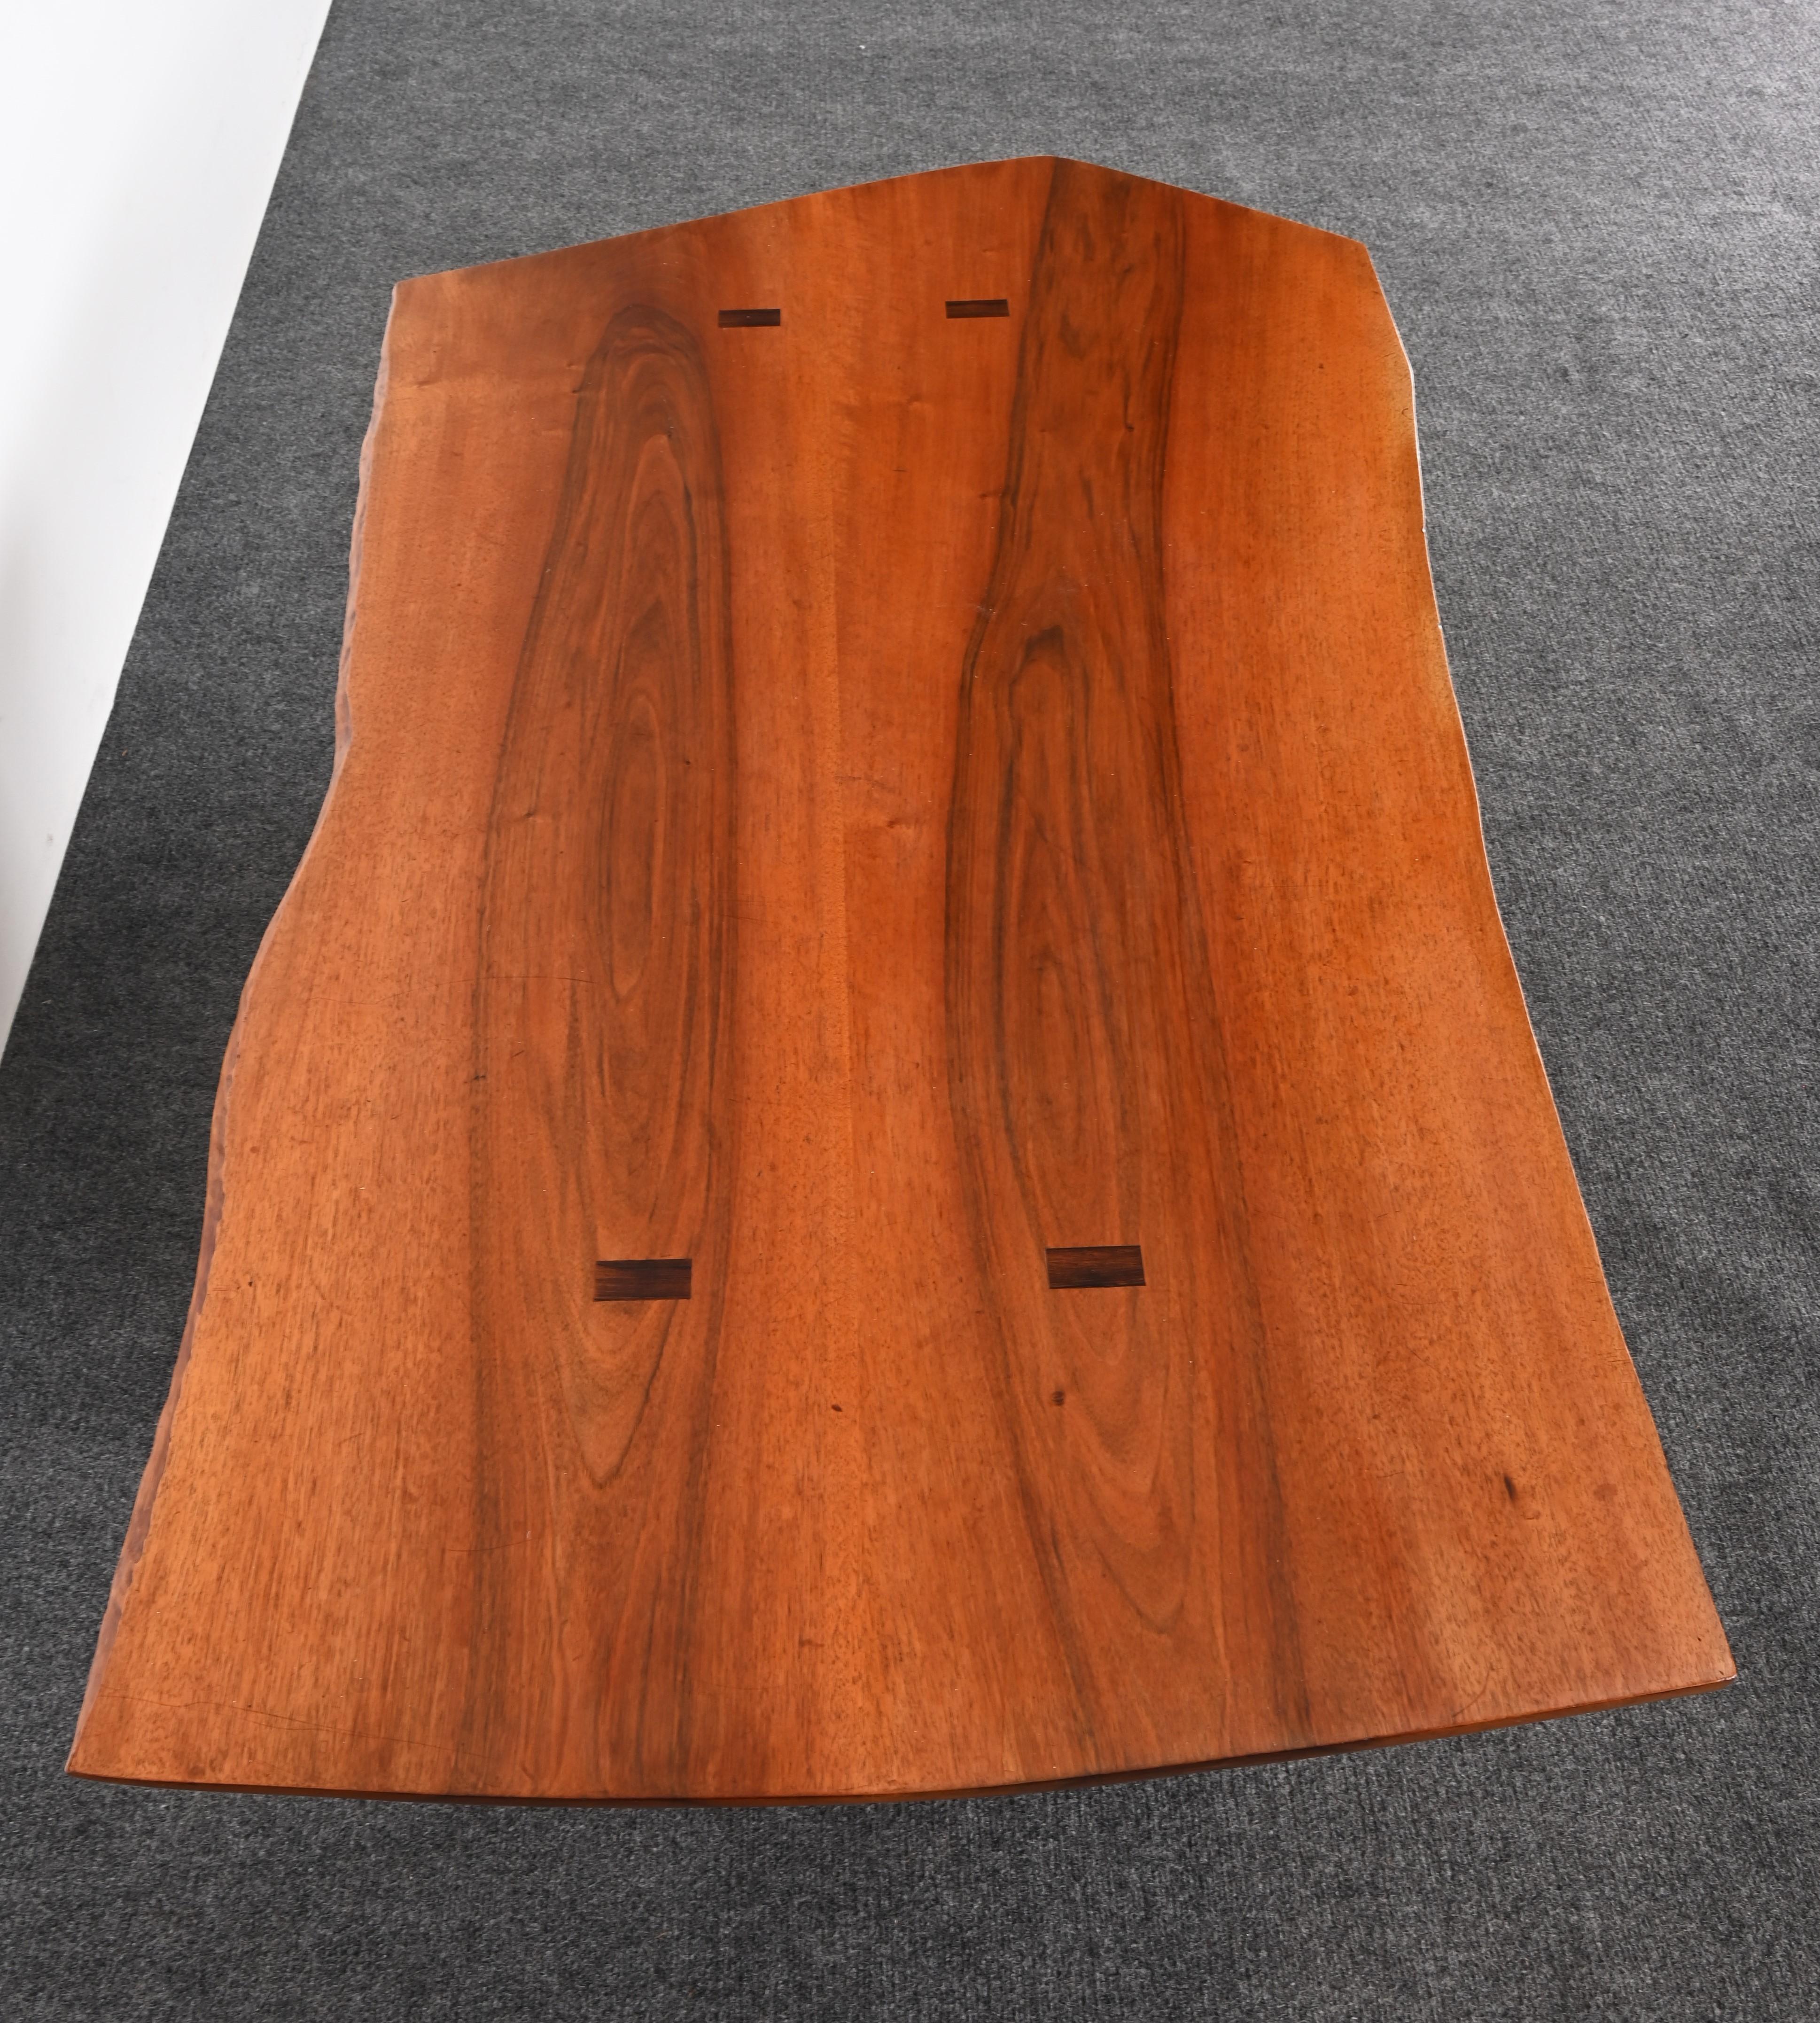 Live Edge Solid Walnut and Rosewood Coffee Table by Richard Rothbard, 1968 For Sale 8